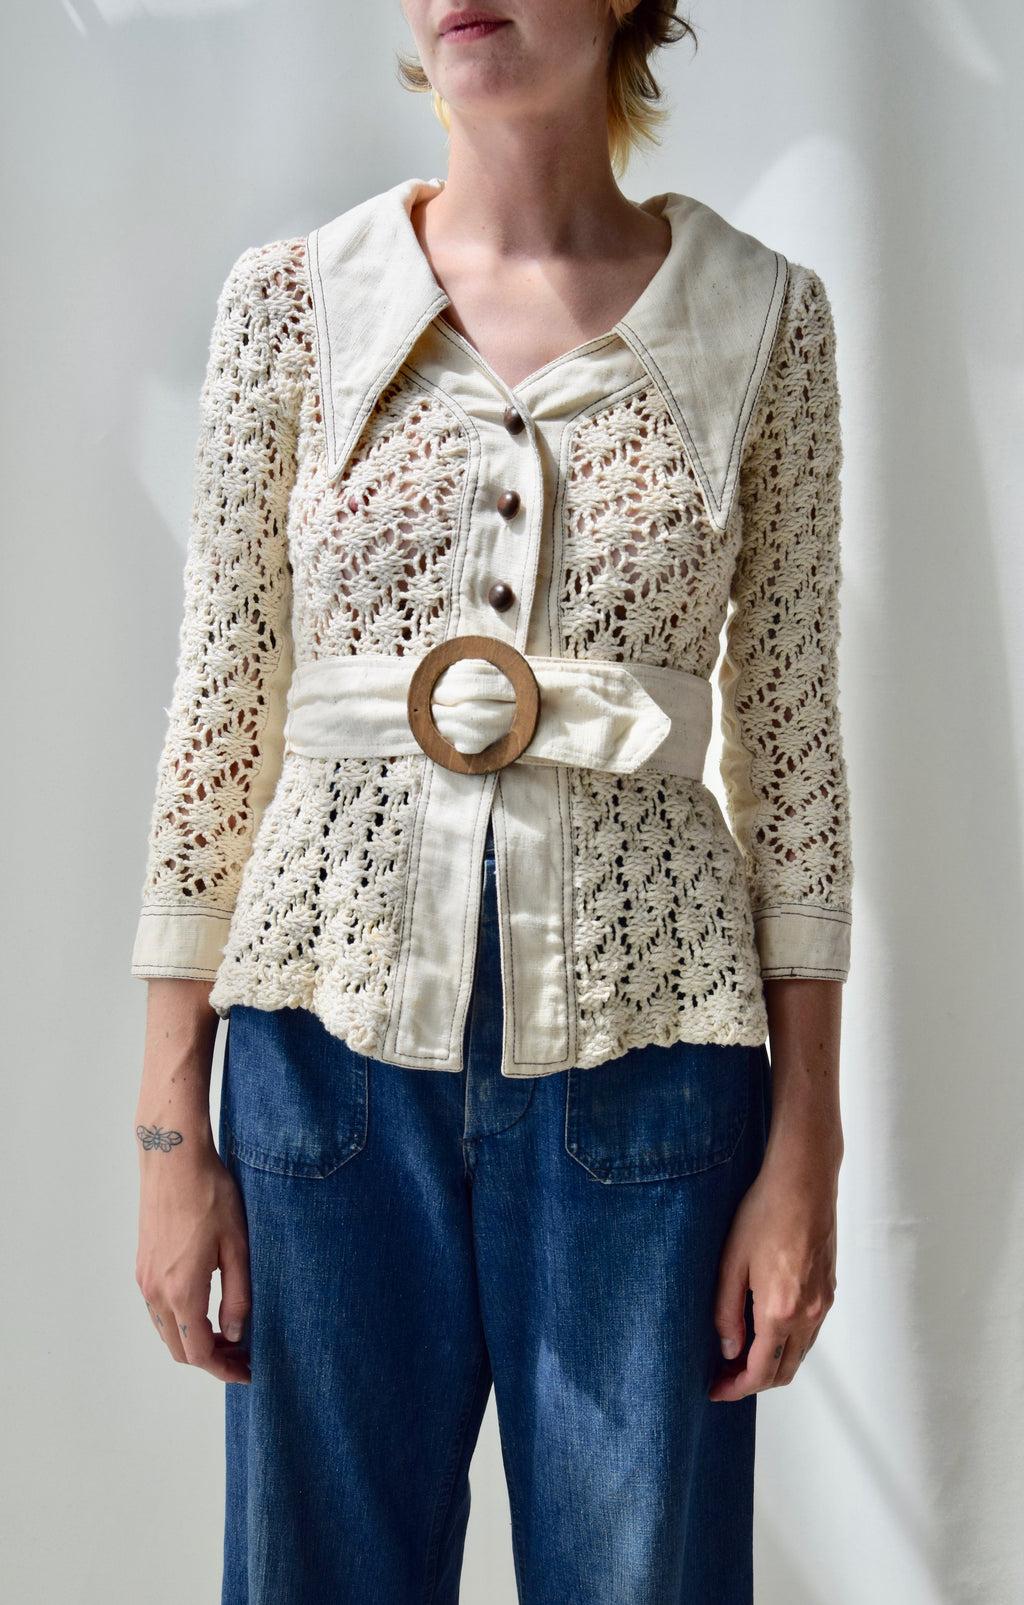 1970's Crocheted Cotton Jacket Top